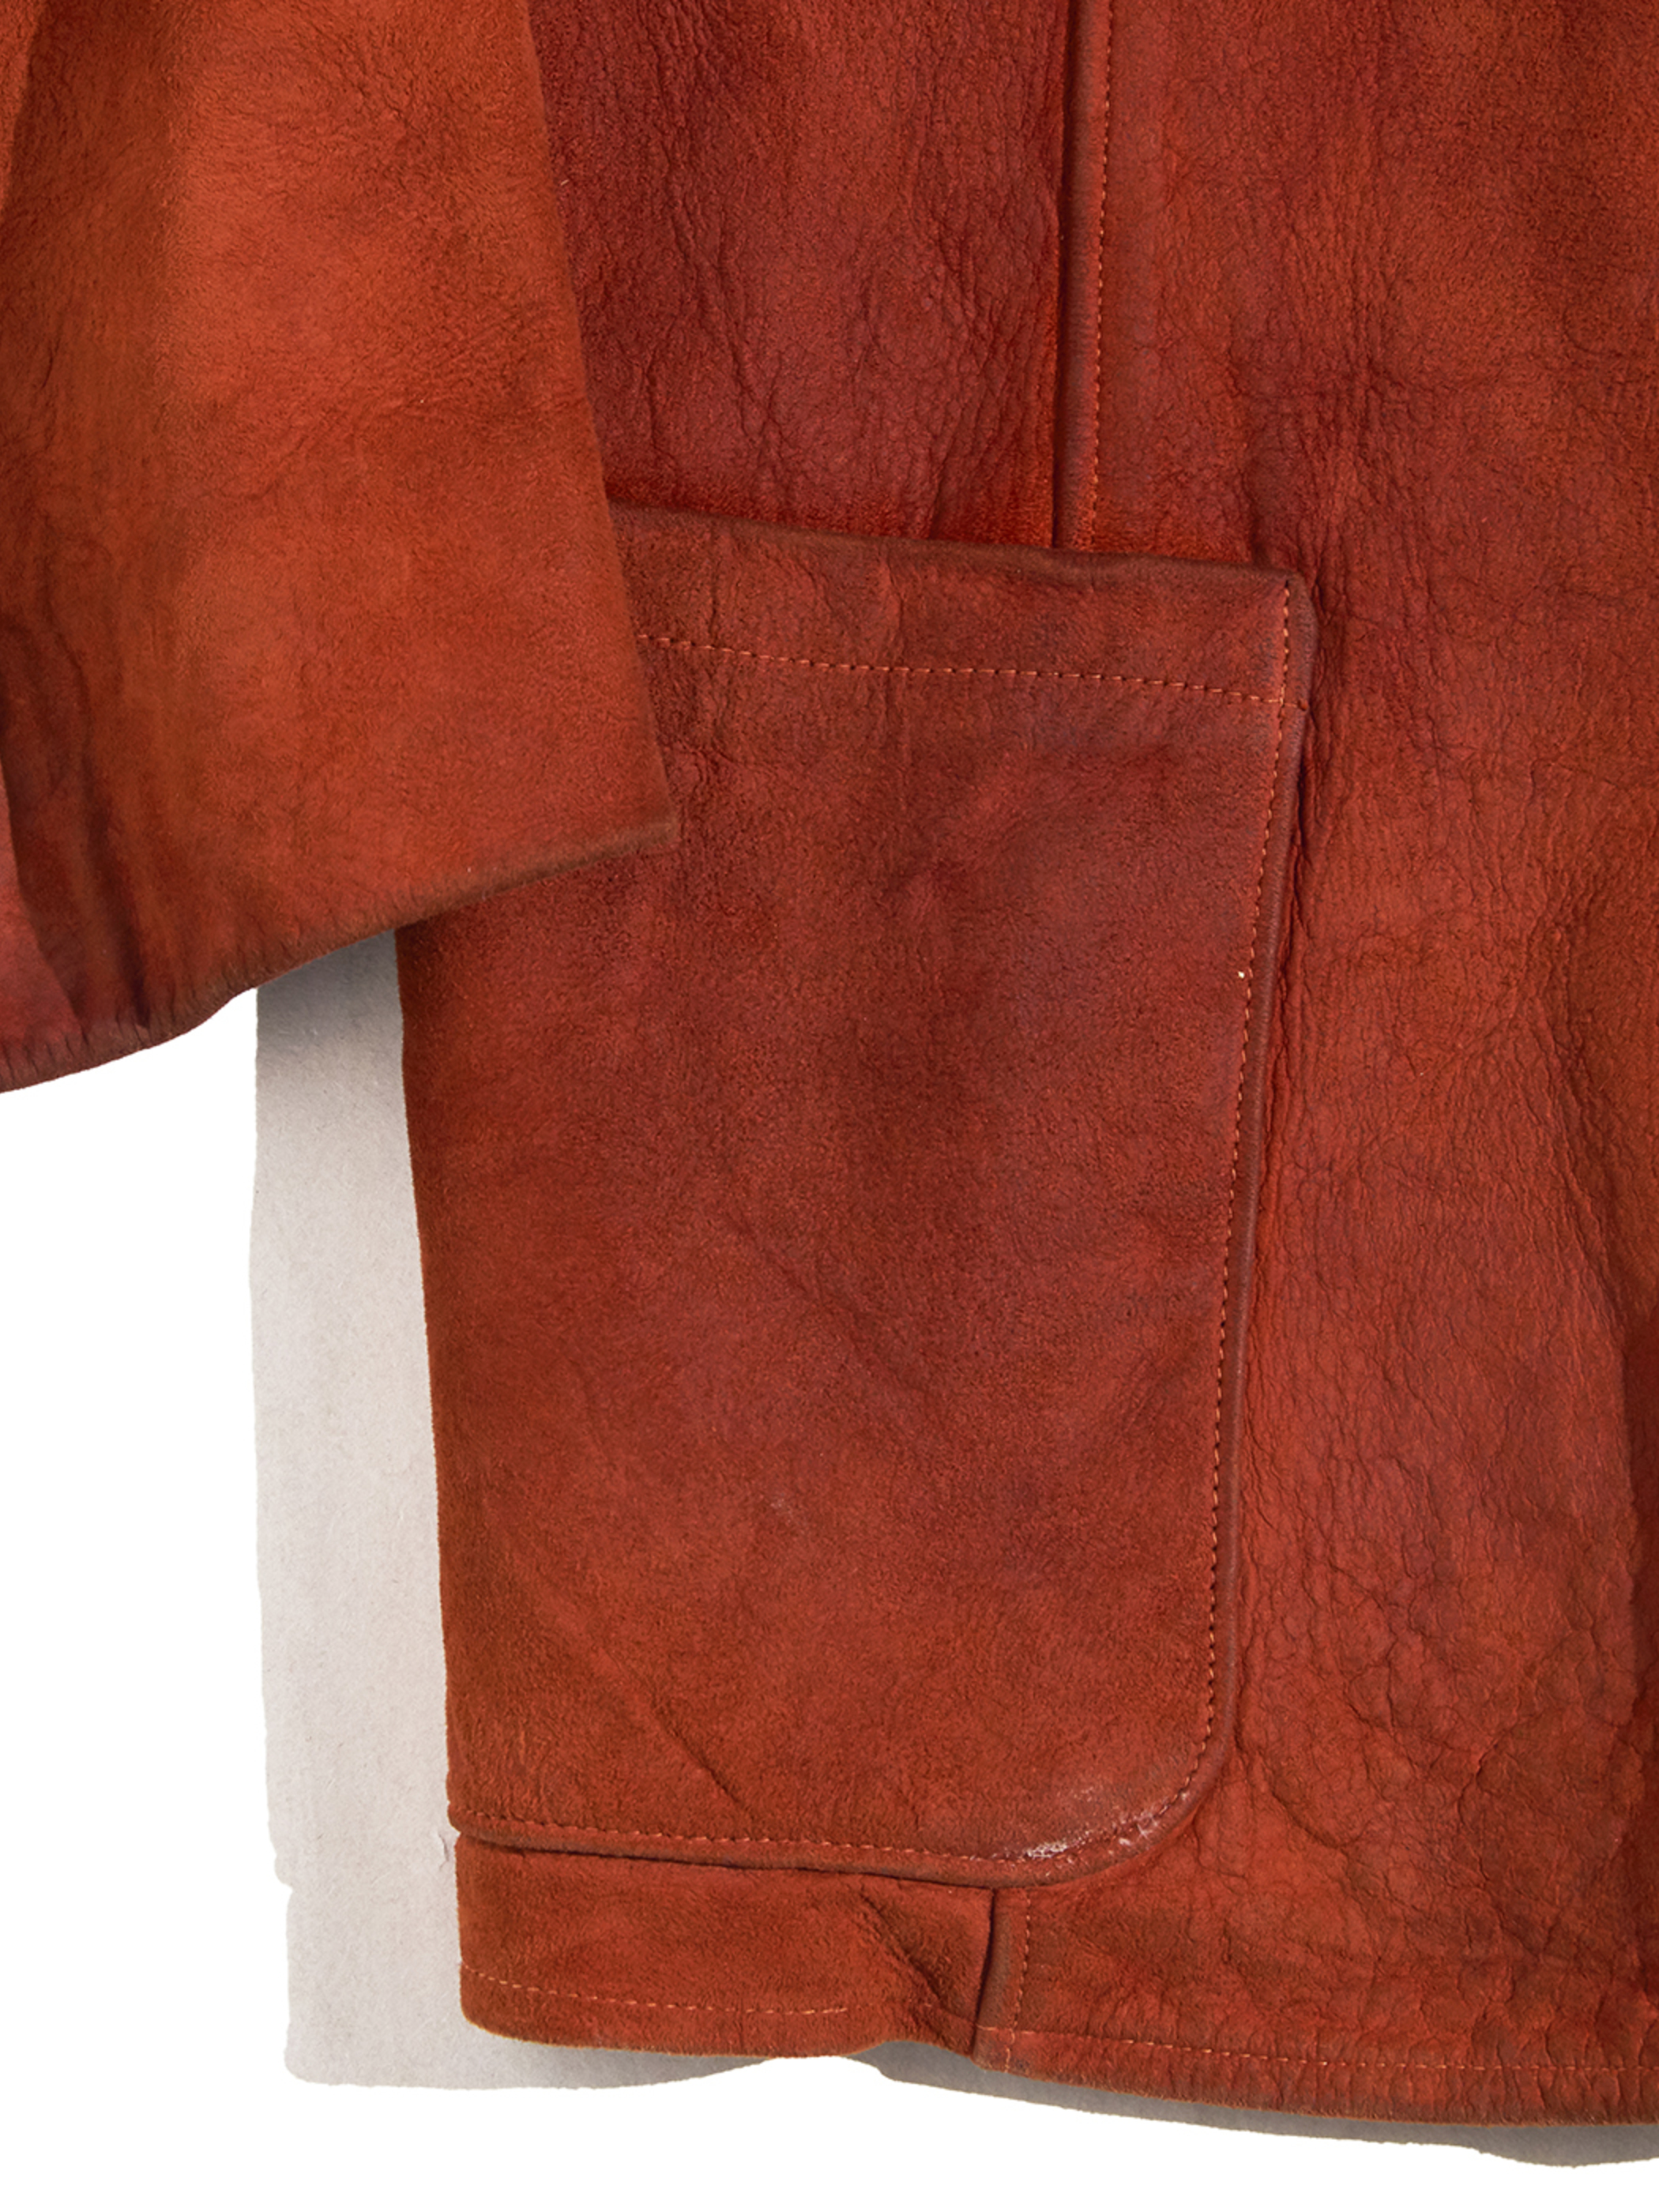 1960s "go-kay" suede leather tailored jacket -REDDISH BROWN-